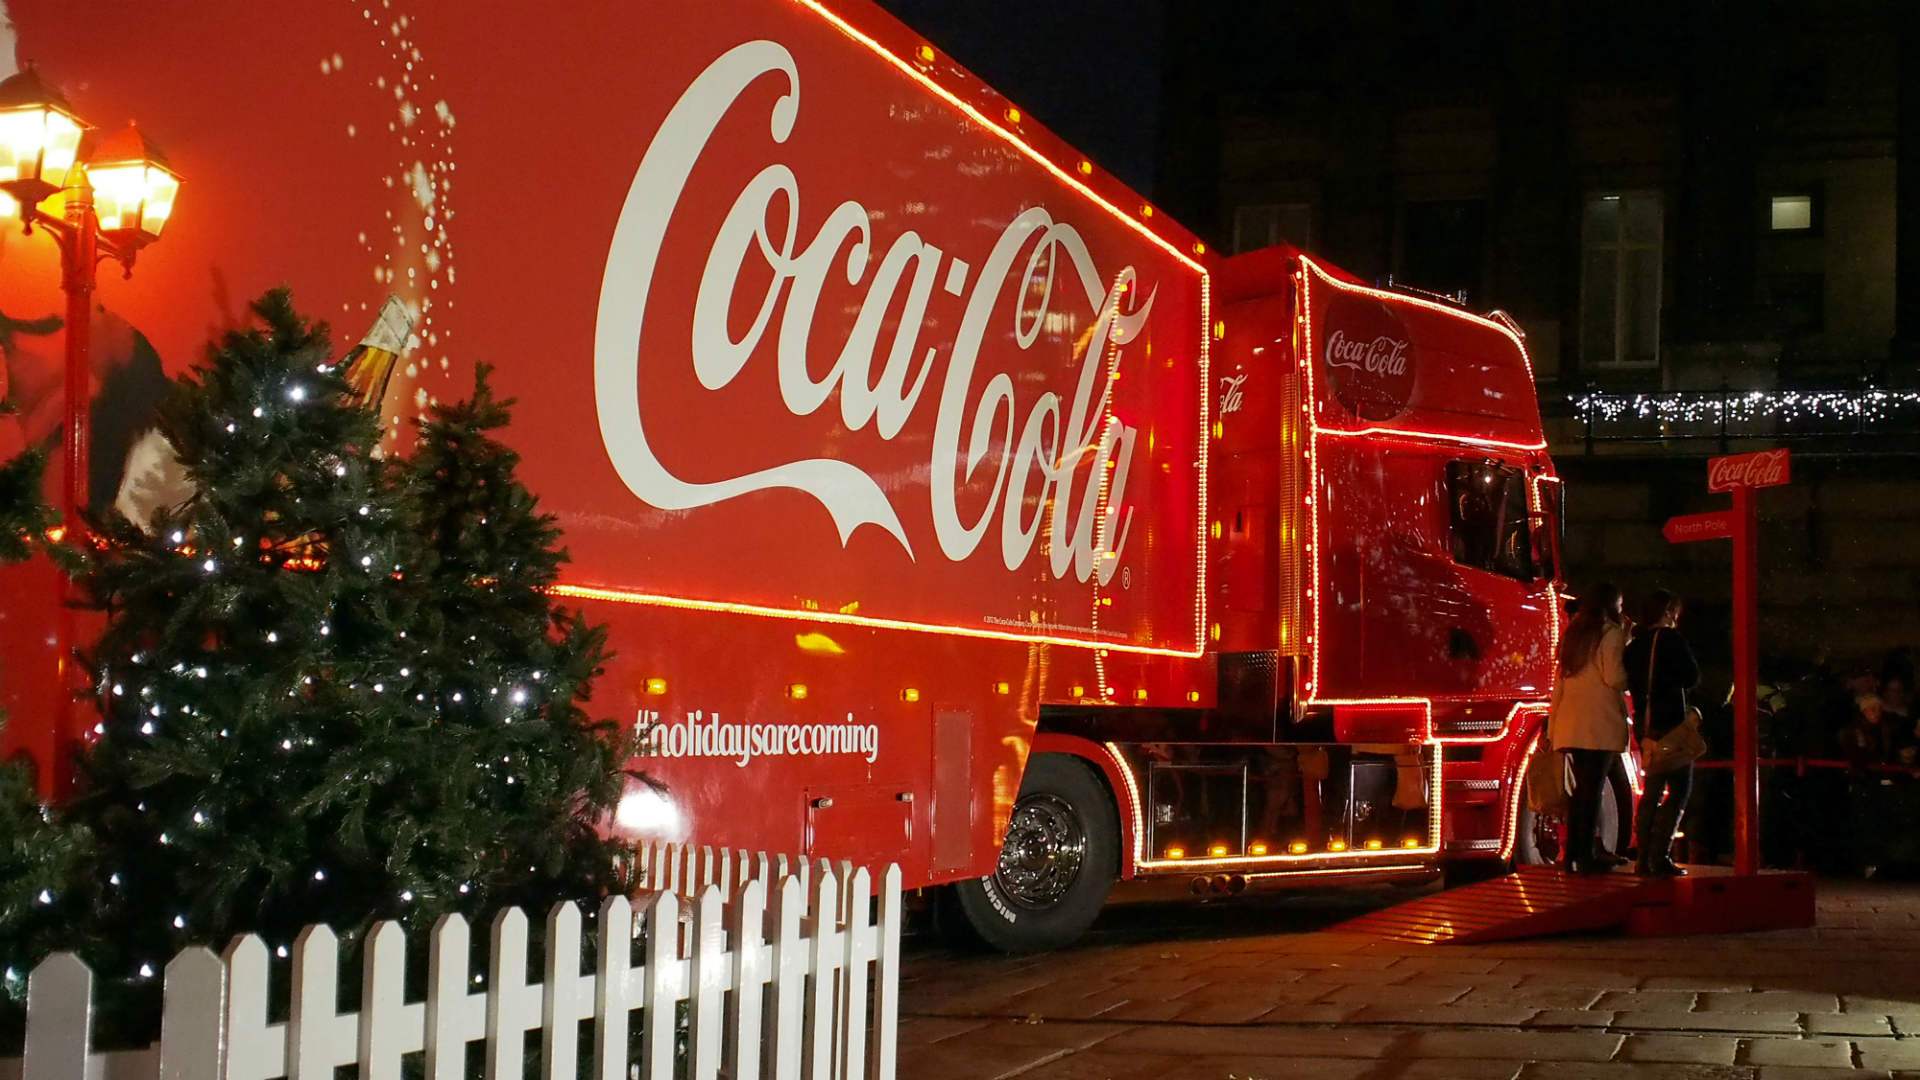 Where Can You See The Coca Cola Christmas Lorry?